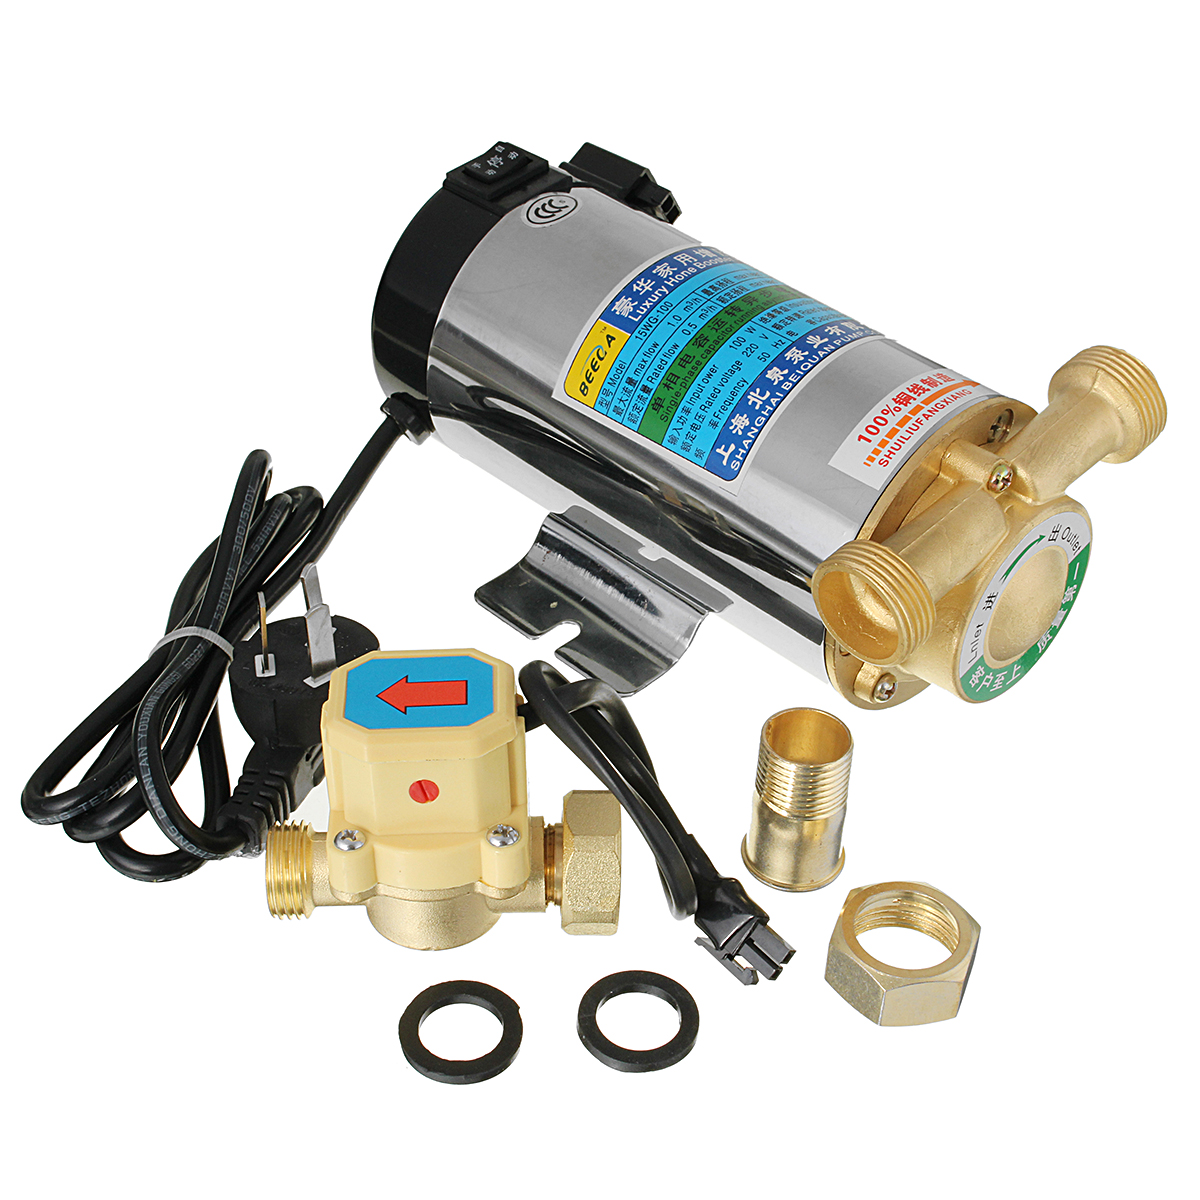 

100W Stainless Automatic Home Shower Washing Machine Water Booster Pump